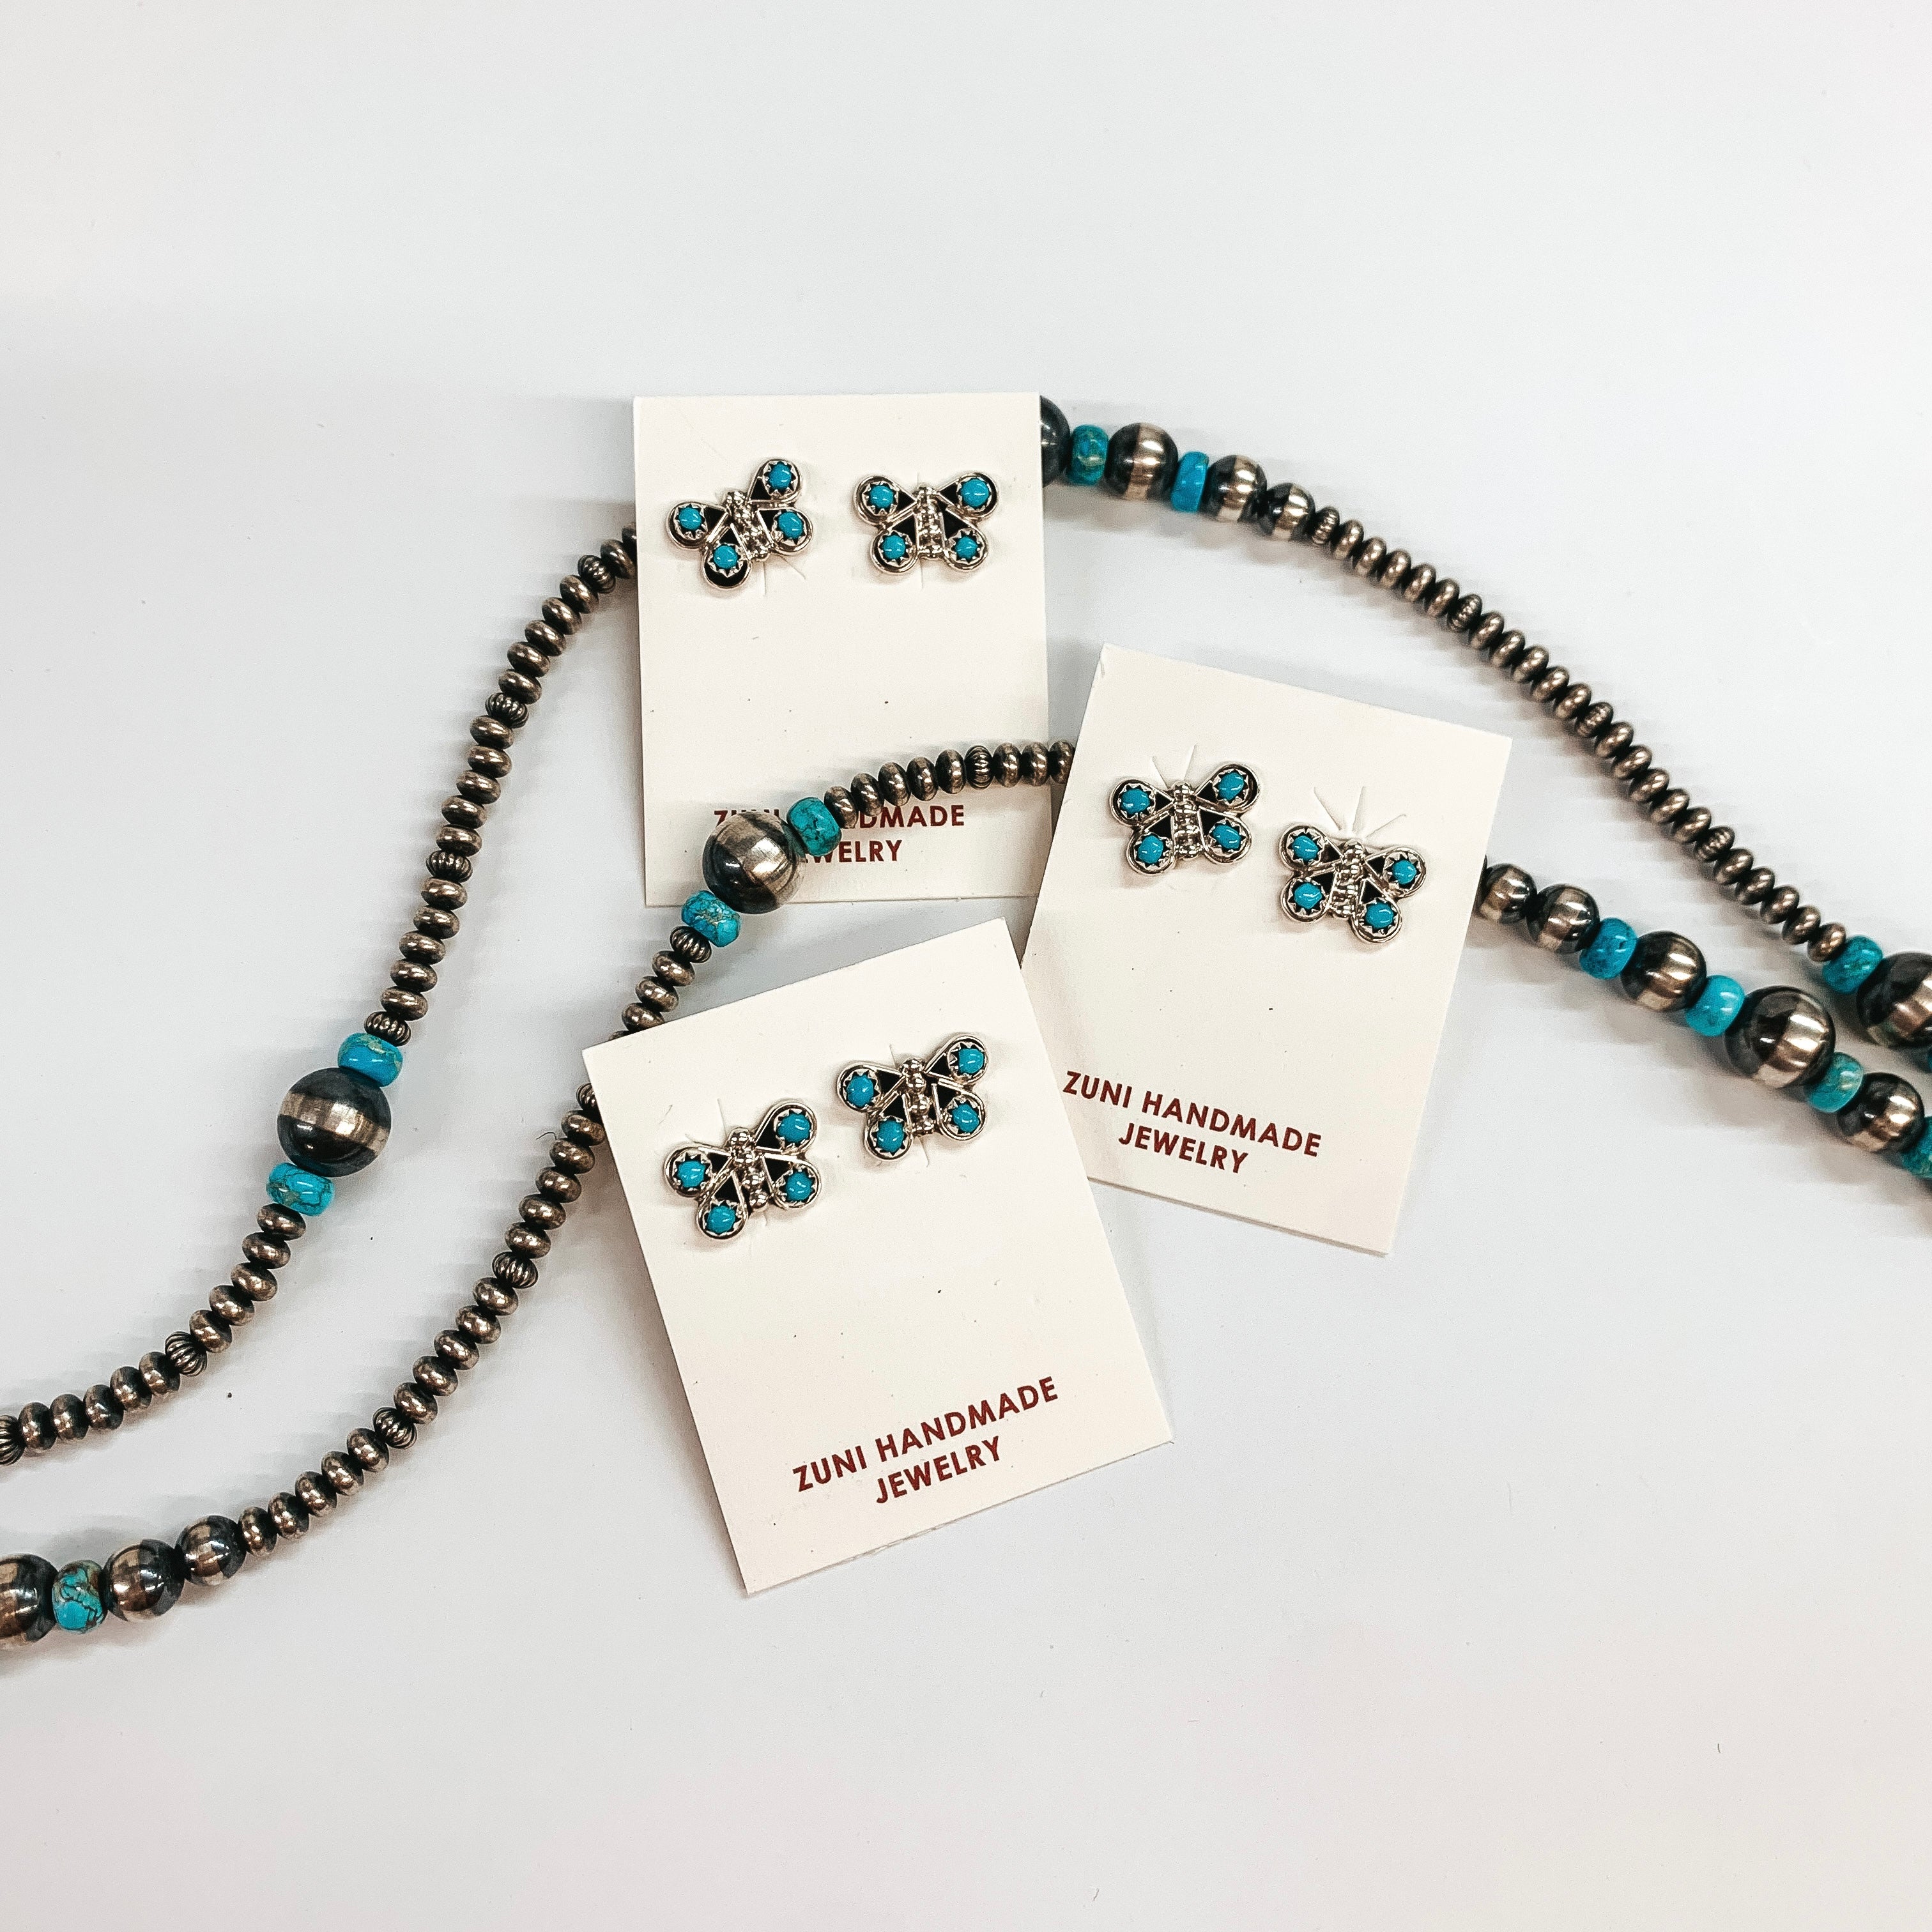 Zuni | Zuni Handmade Genuine Sterling Butterfly Earrings with Small Turquoise Stones - Giddy Up Glamour Boutique